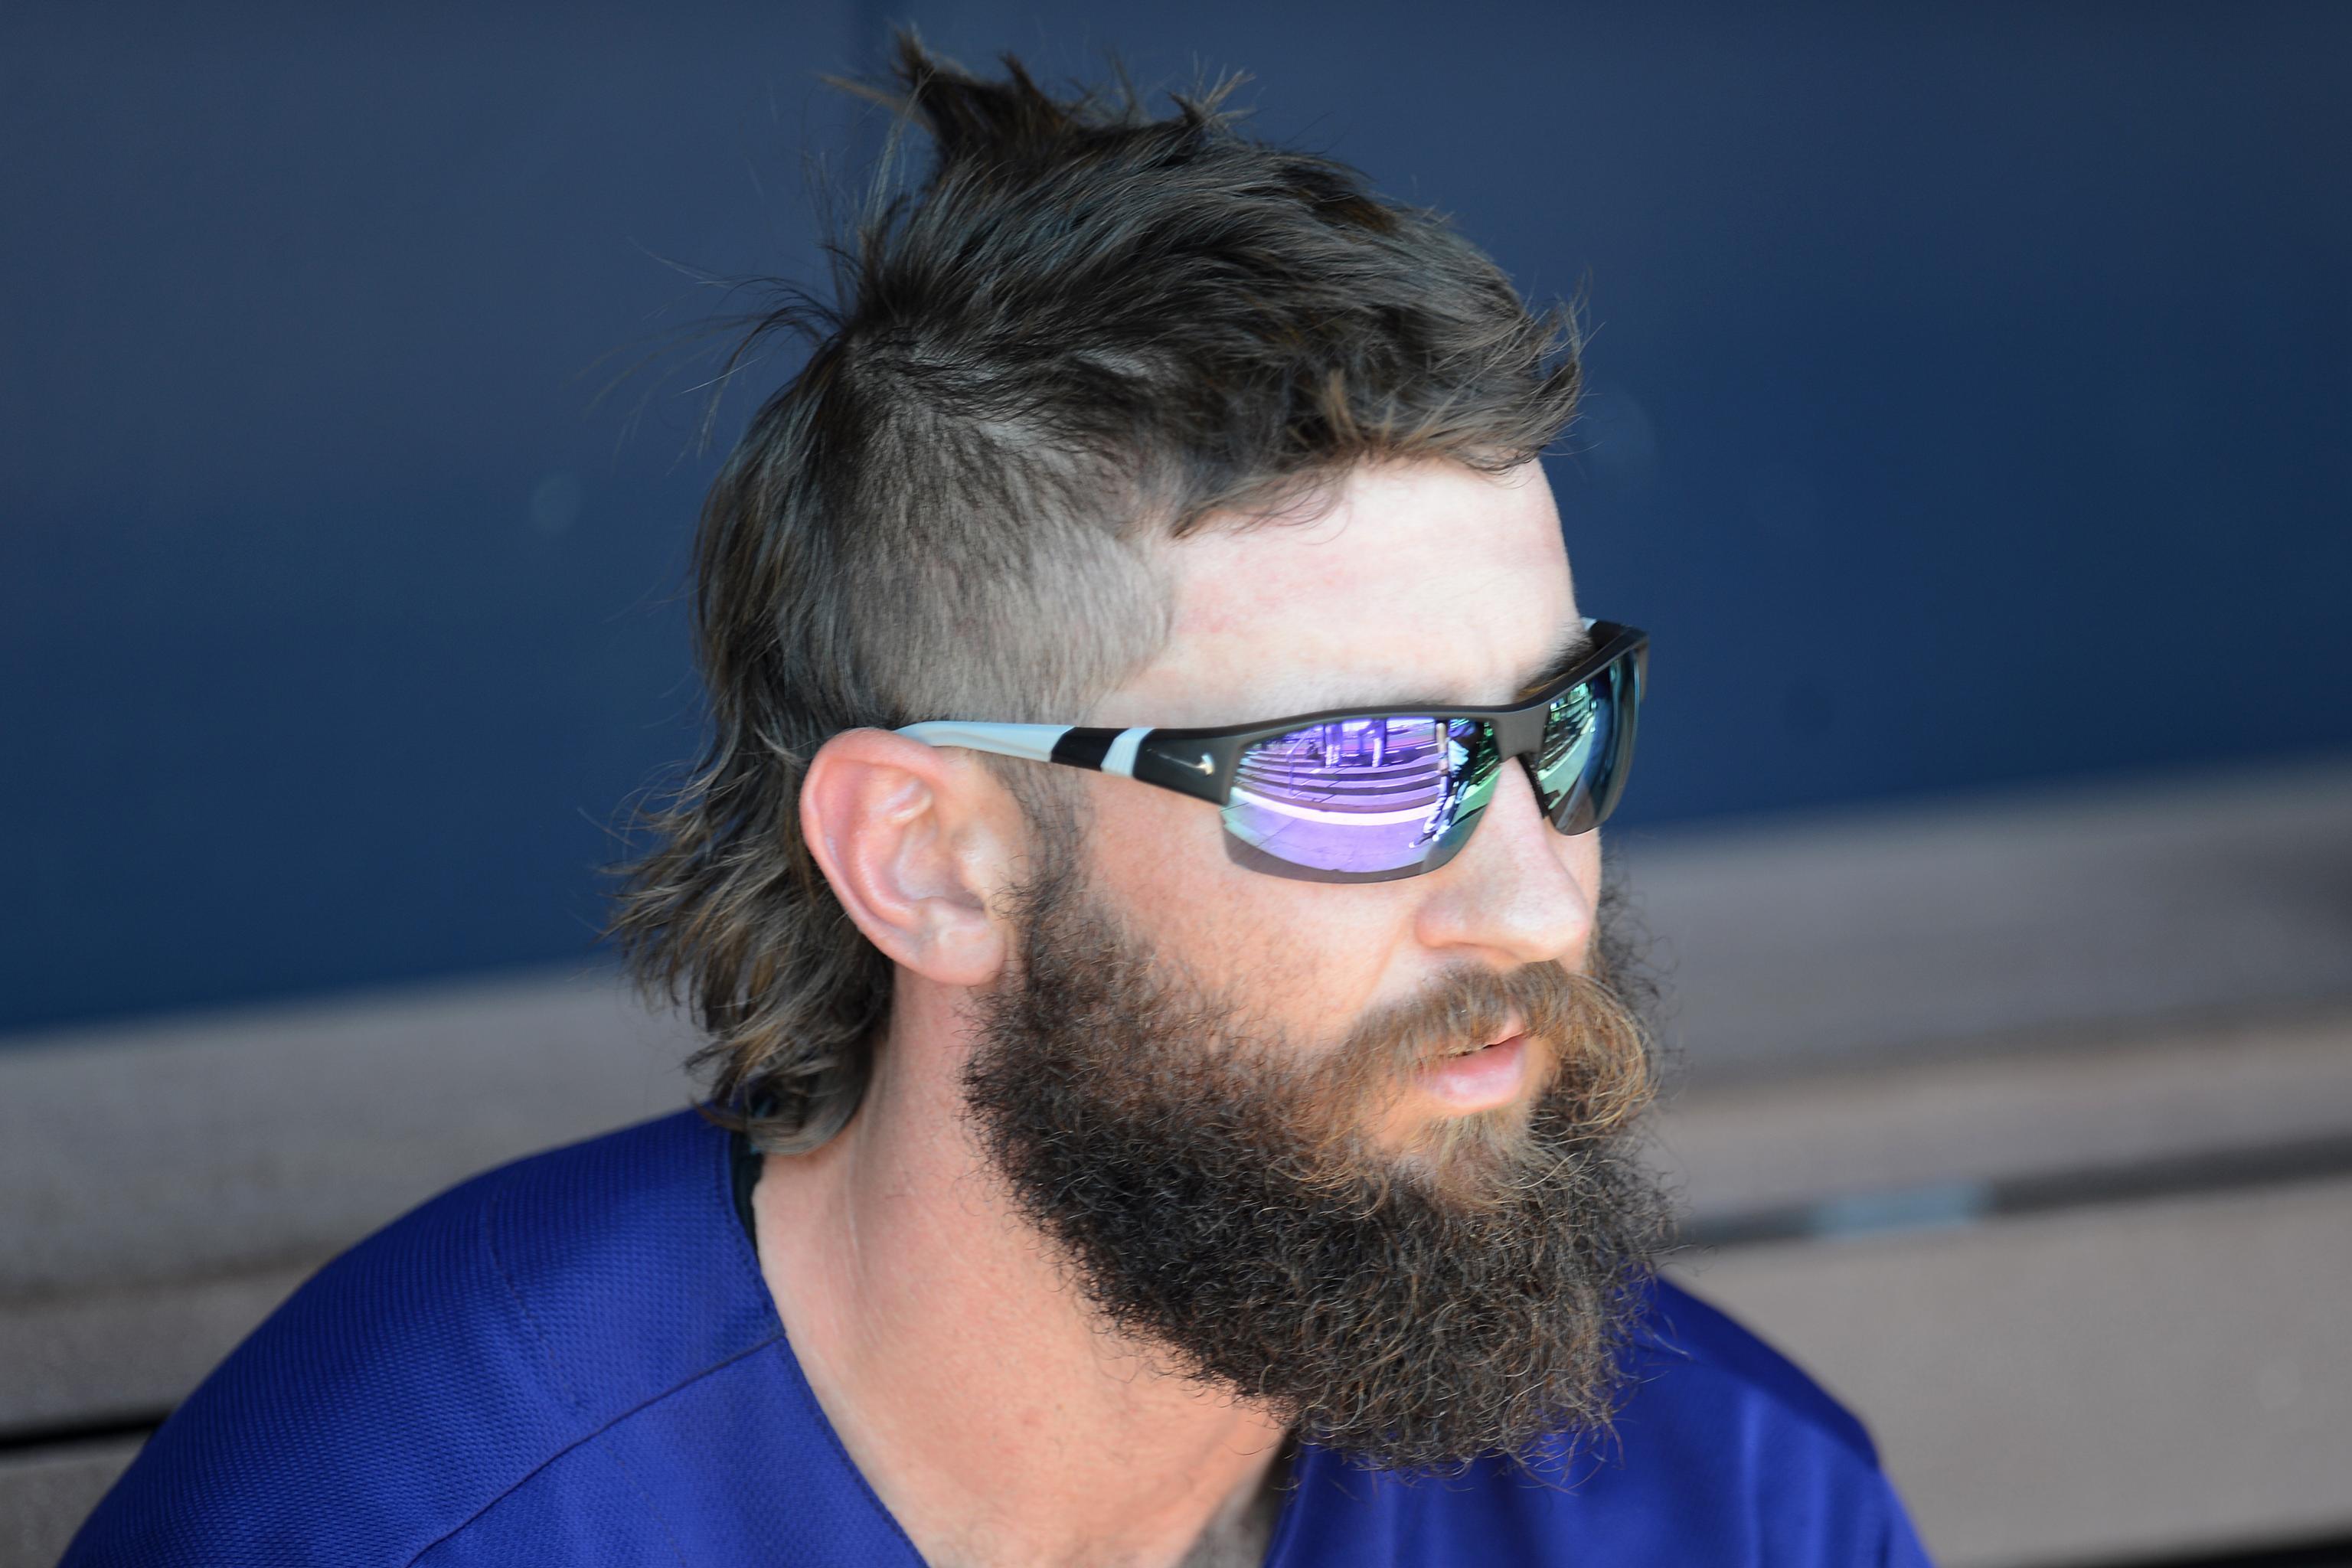 Charlie Blackmon injury update: Rehab stint to begin with Albuquerque, by  Colorado Rockies